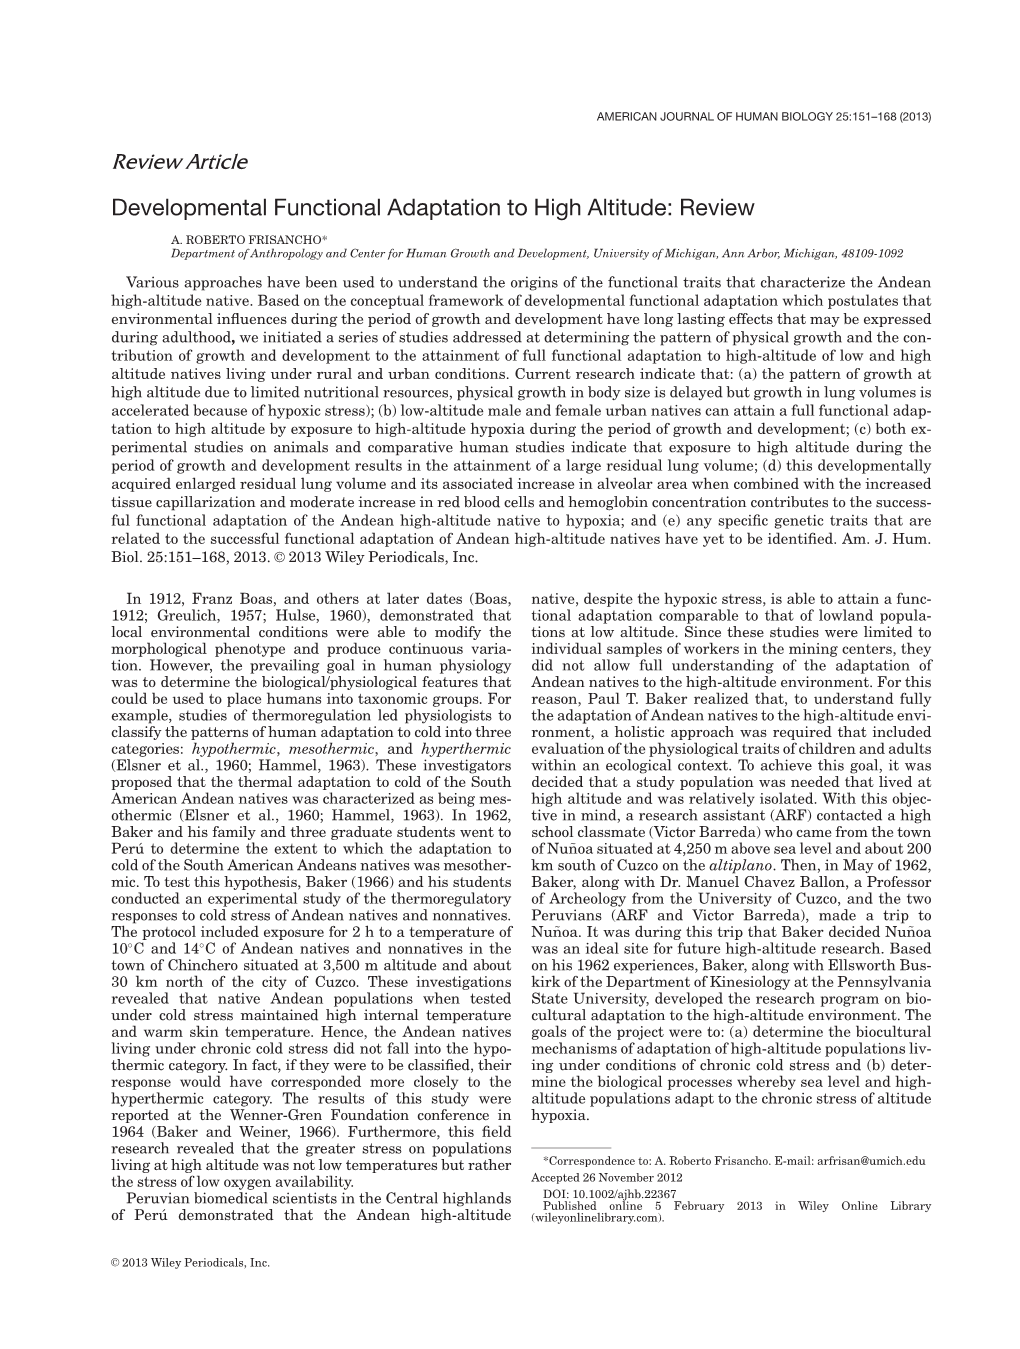 Developmental Functional Adaptation to High Altitude: Review